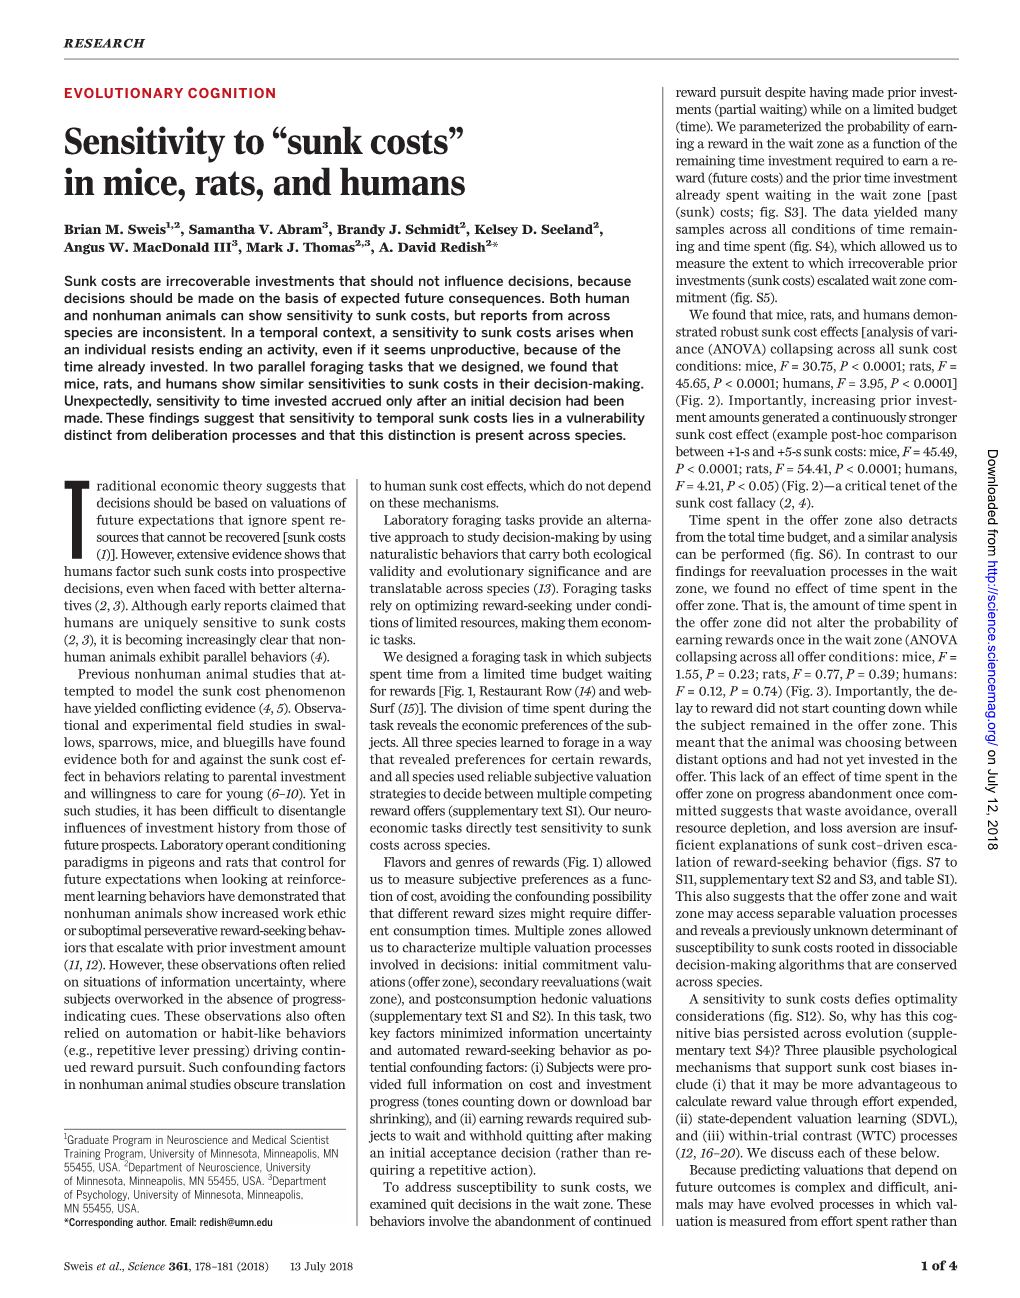 Sensitivity to “Sunk Costs” in Mice, Rats, and Humans Brian M